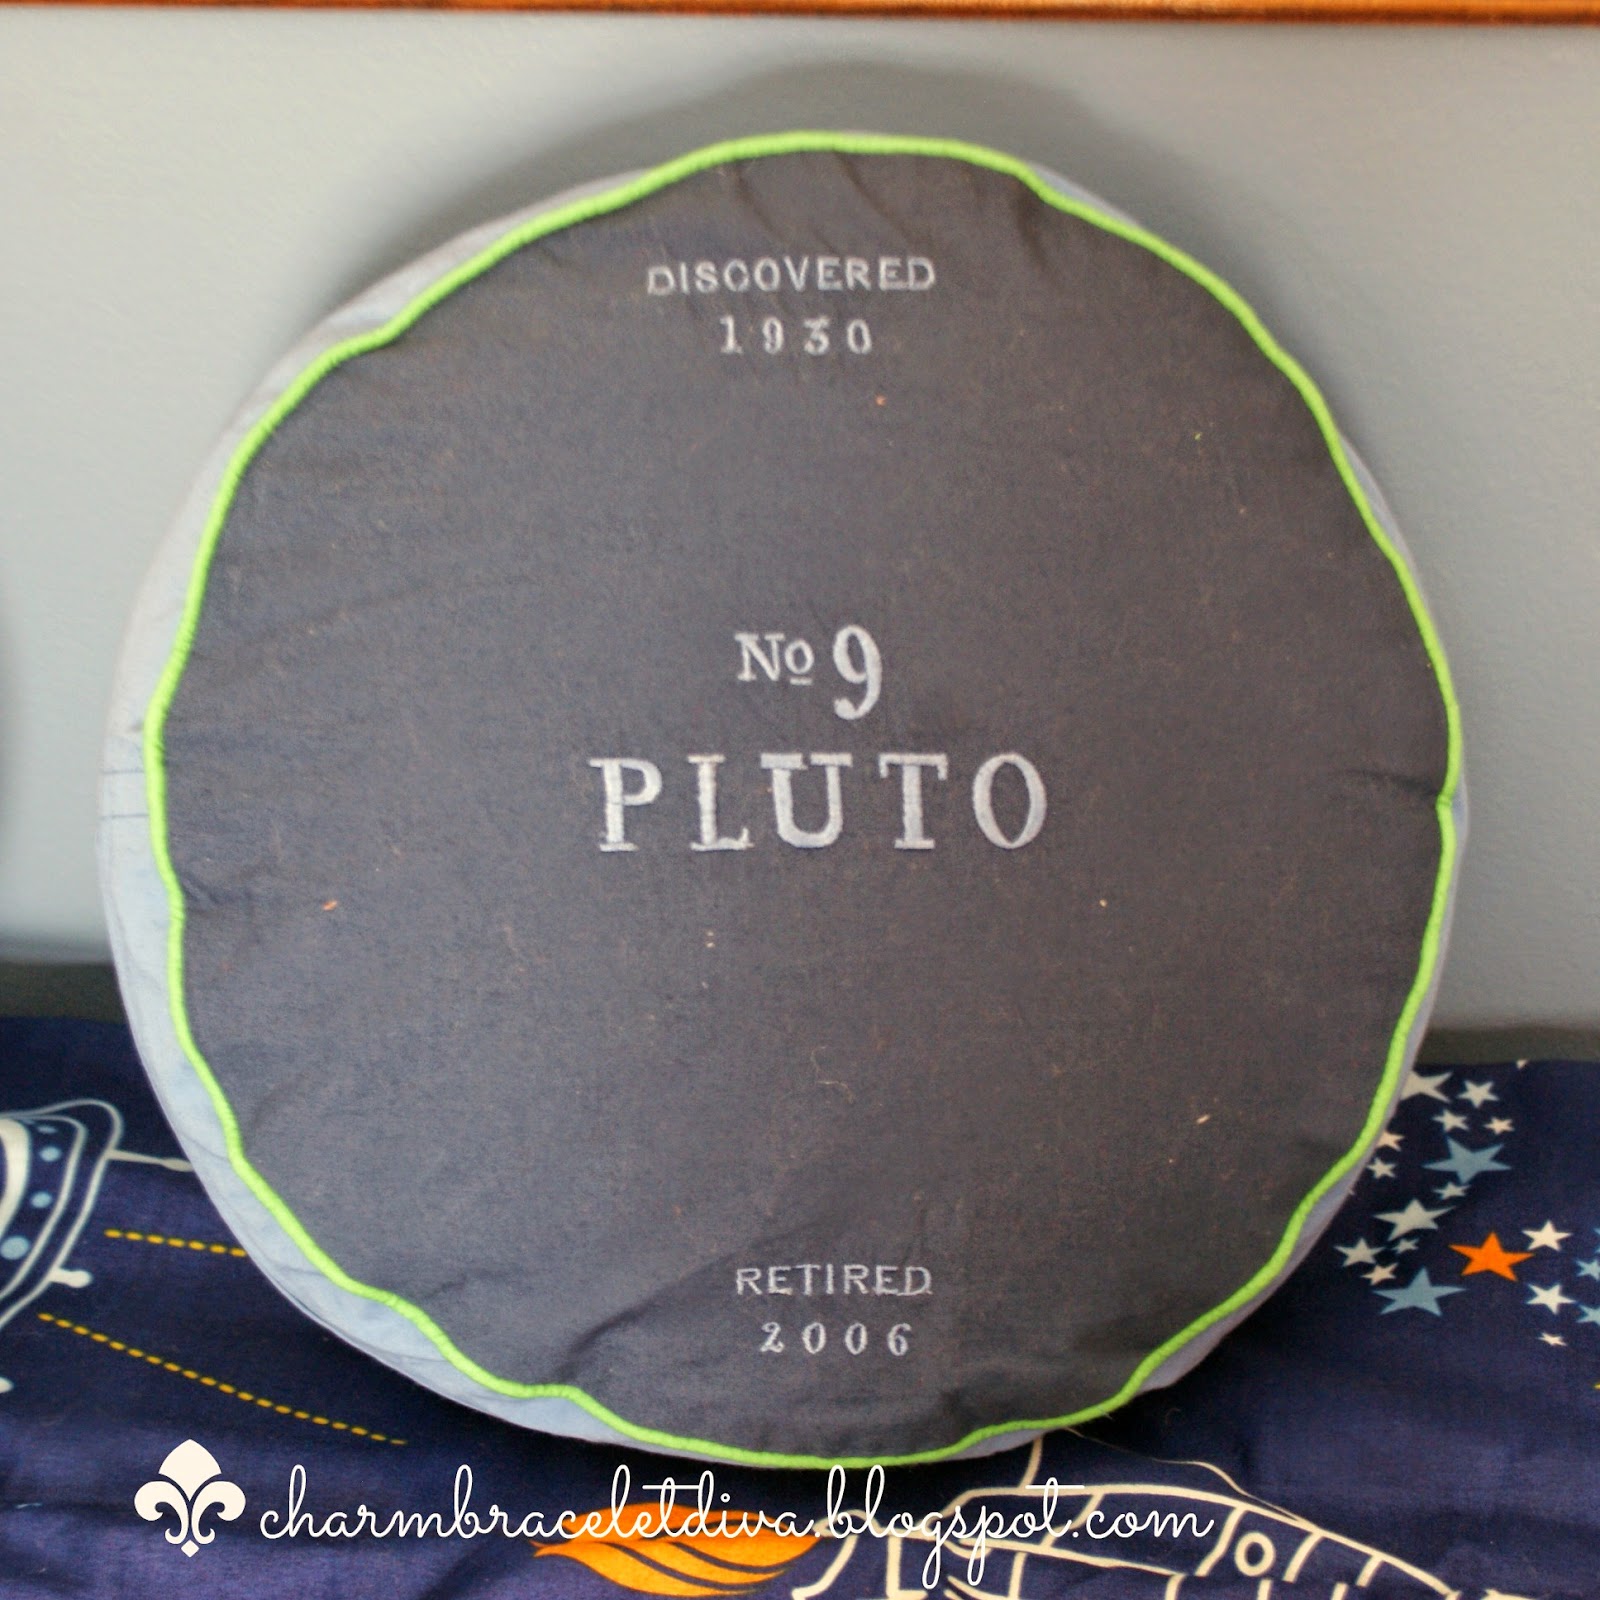 Land of Nod Pluto pillow back side